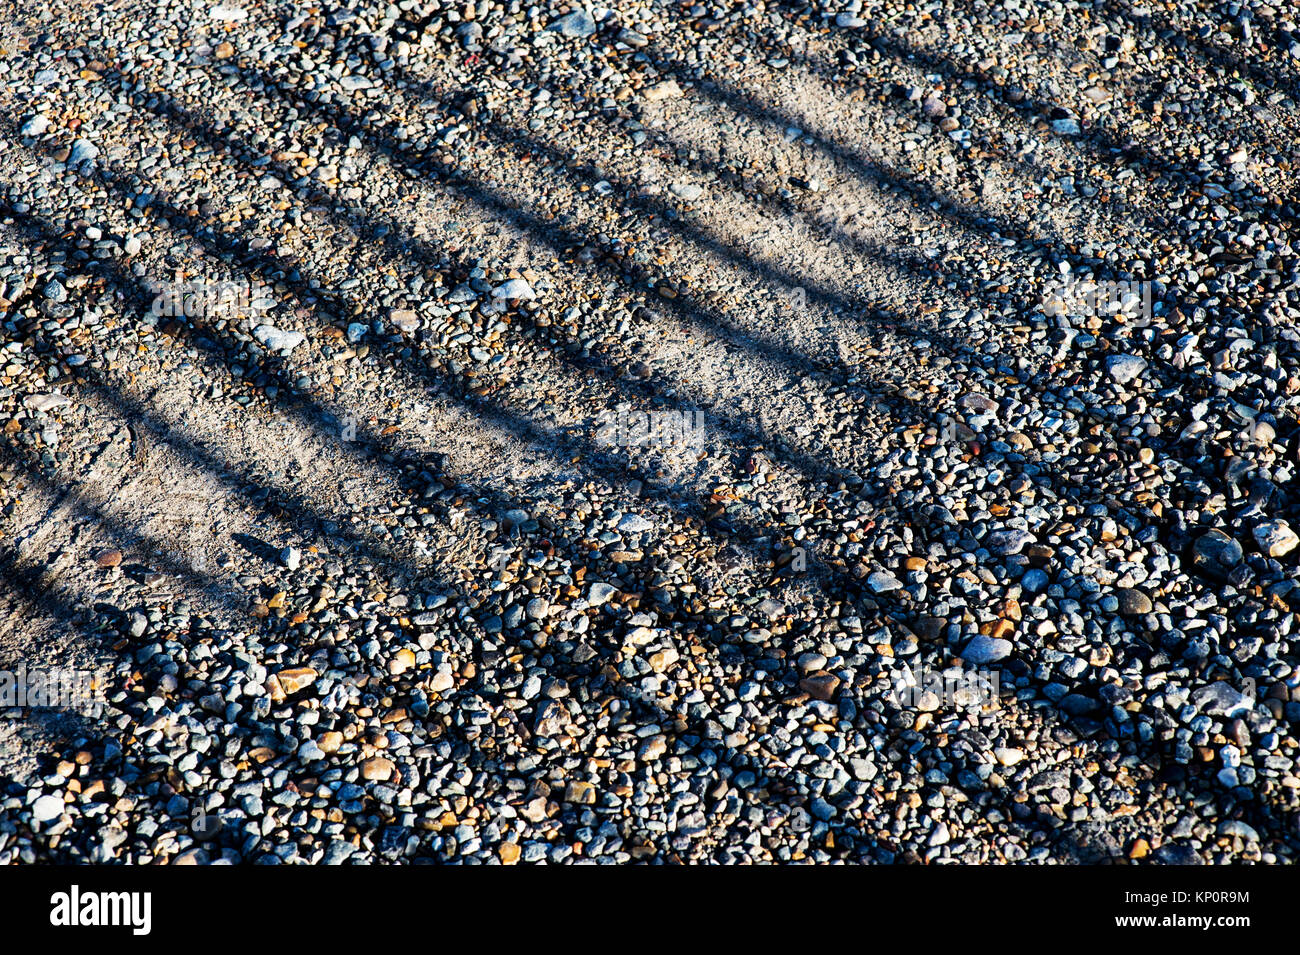 Shadows of a Wooden Fence on a Gravel Pathway Stock Photo